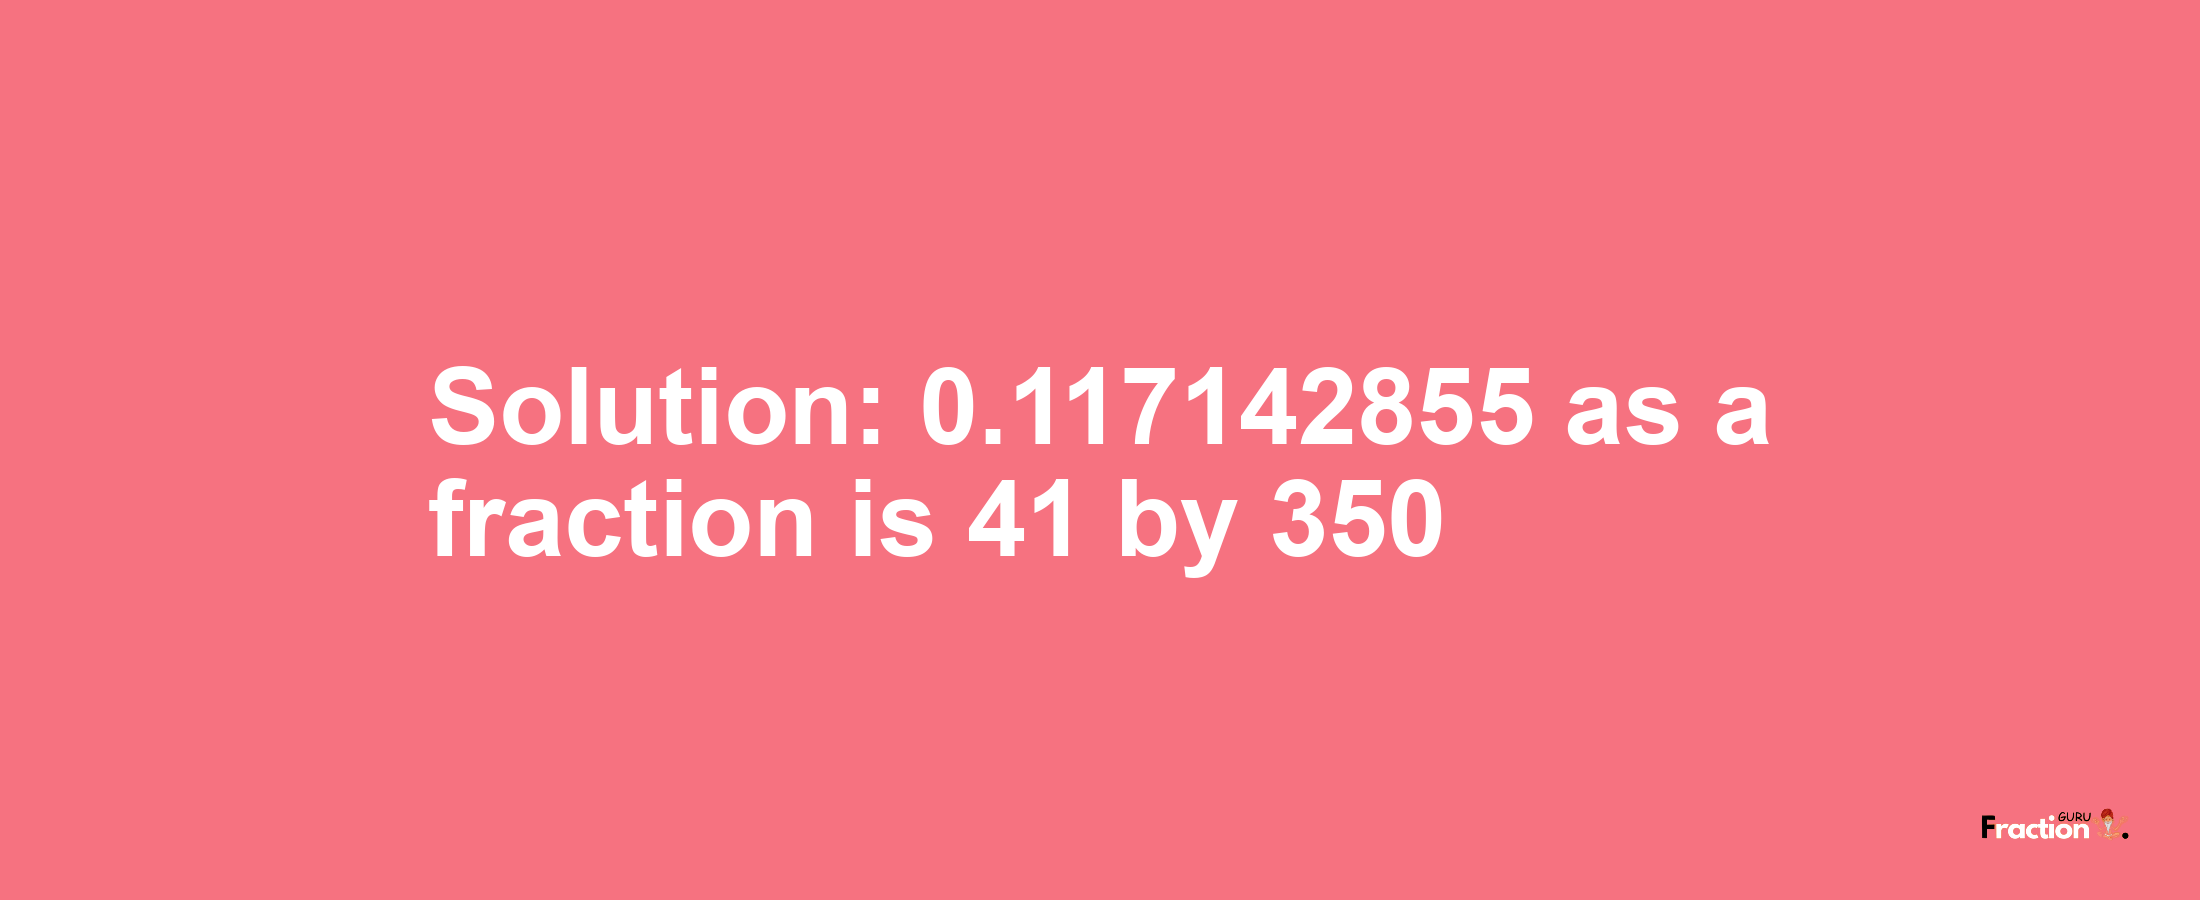 Solution:0.117142855 as a fraction is 41/350